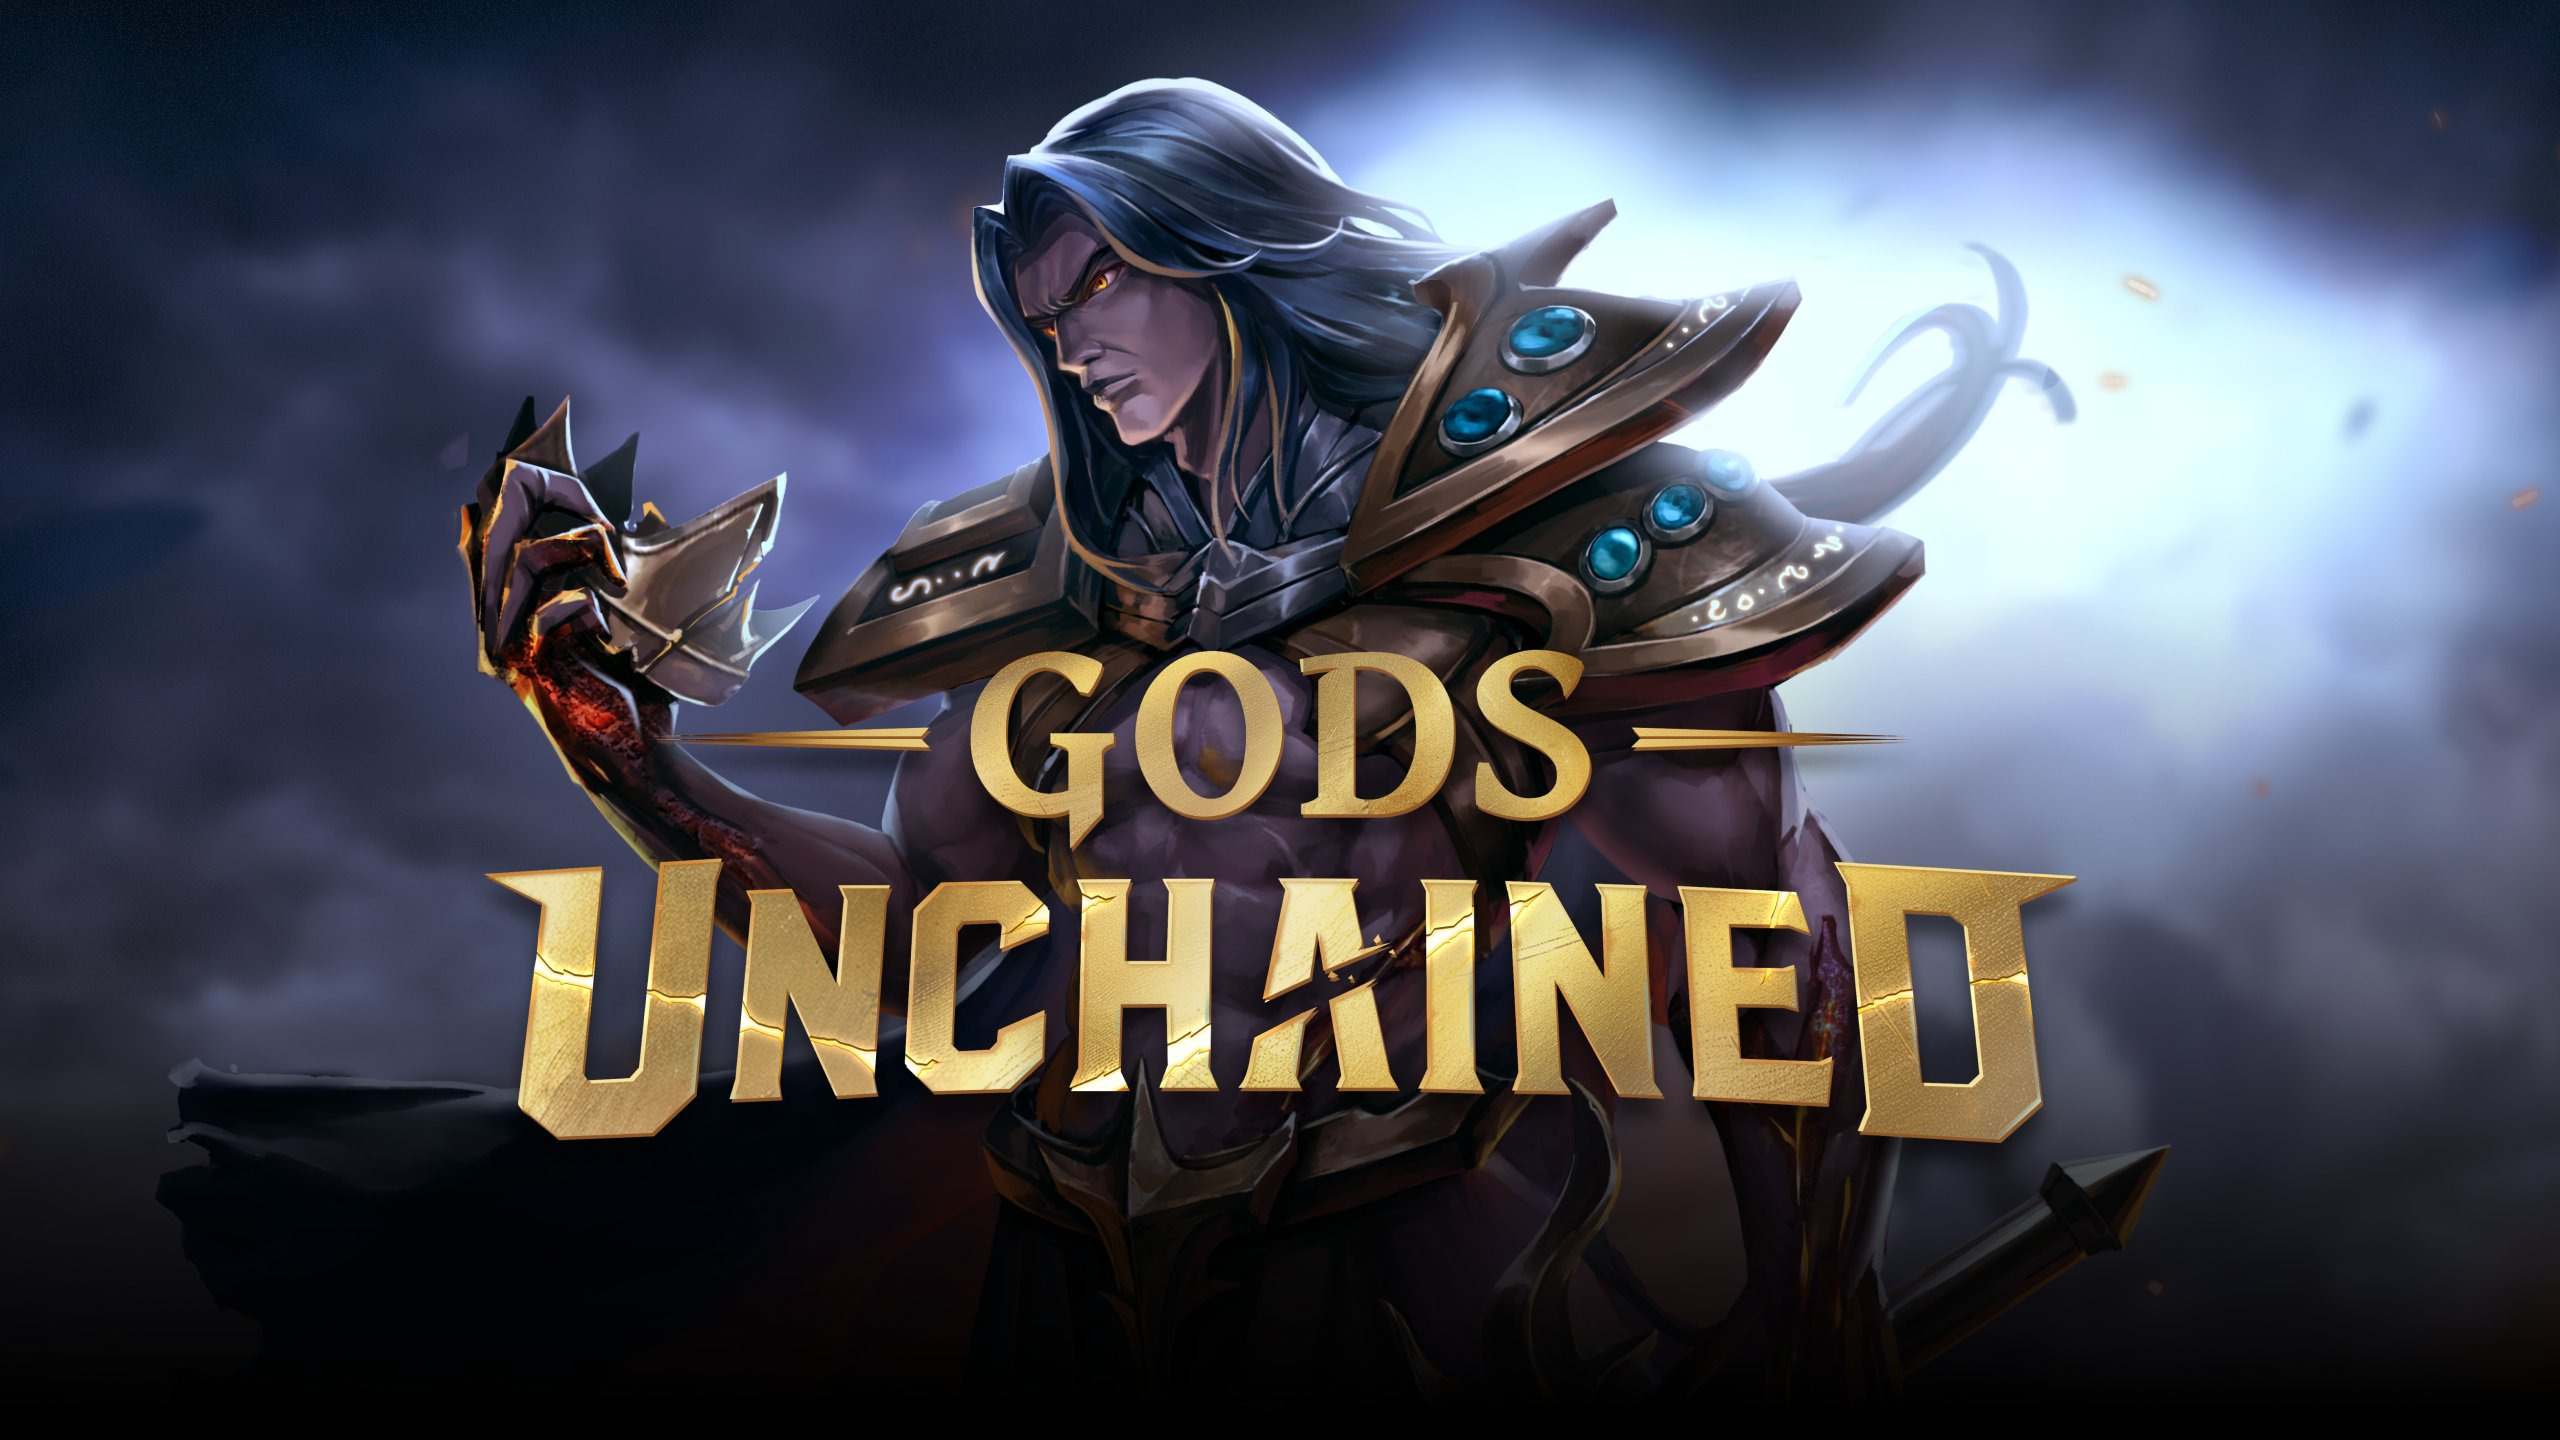 Gods Unchained Guide - How to Play & Earn $GODS on Gods Unchained